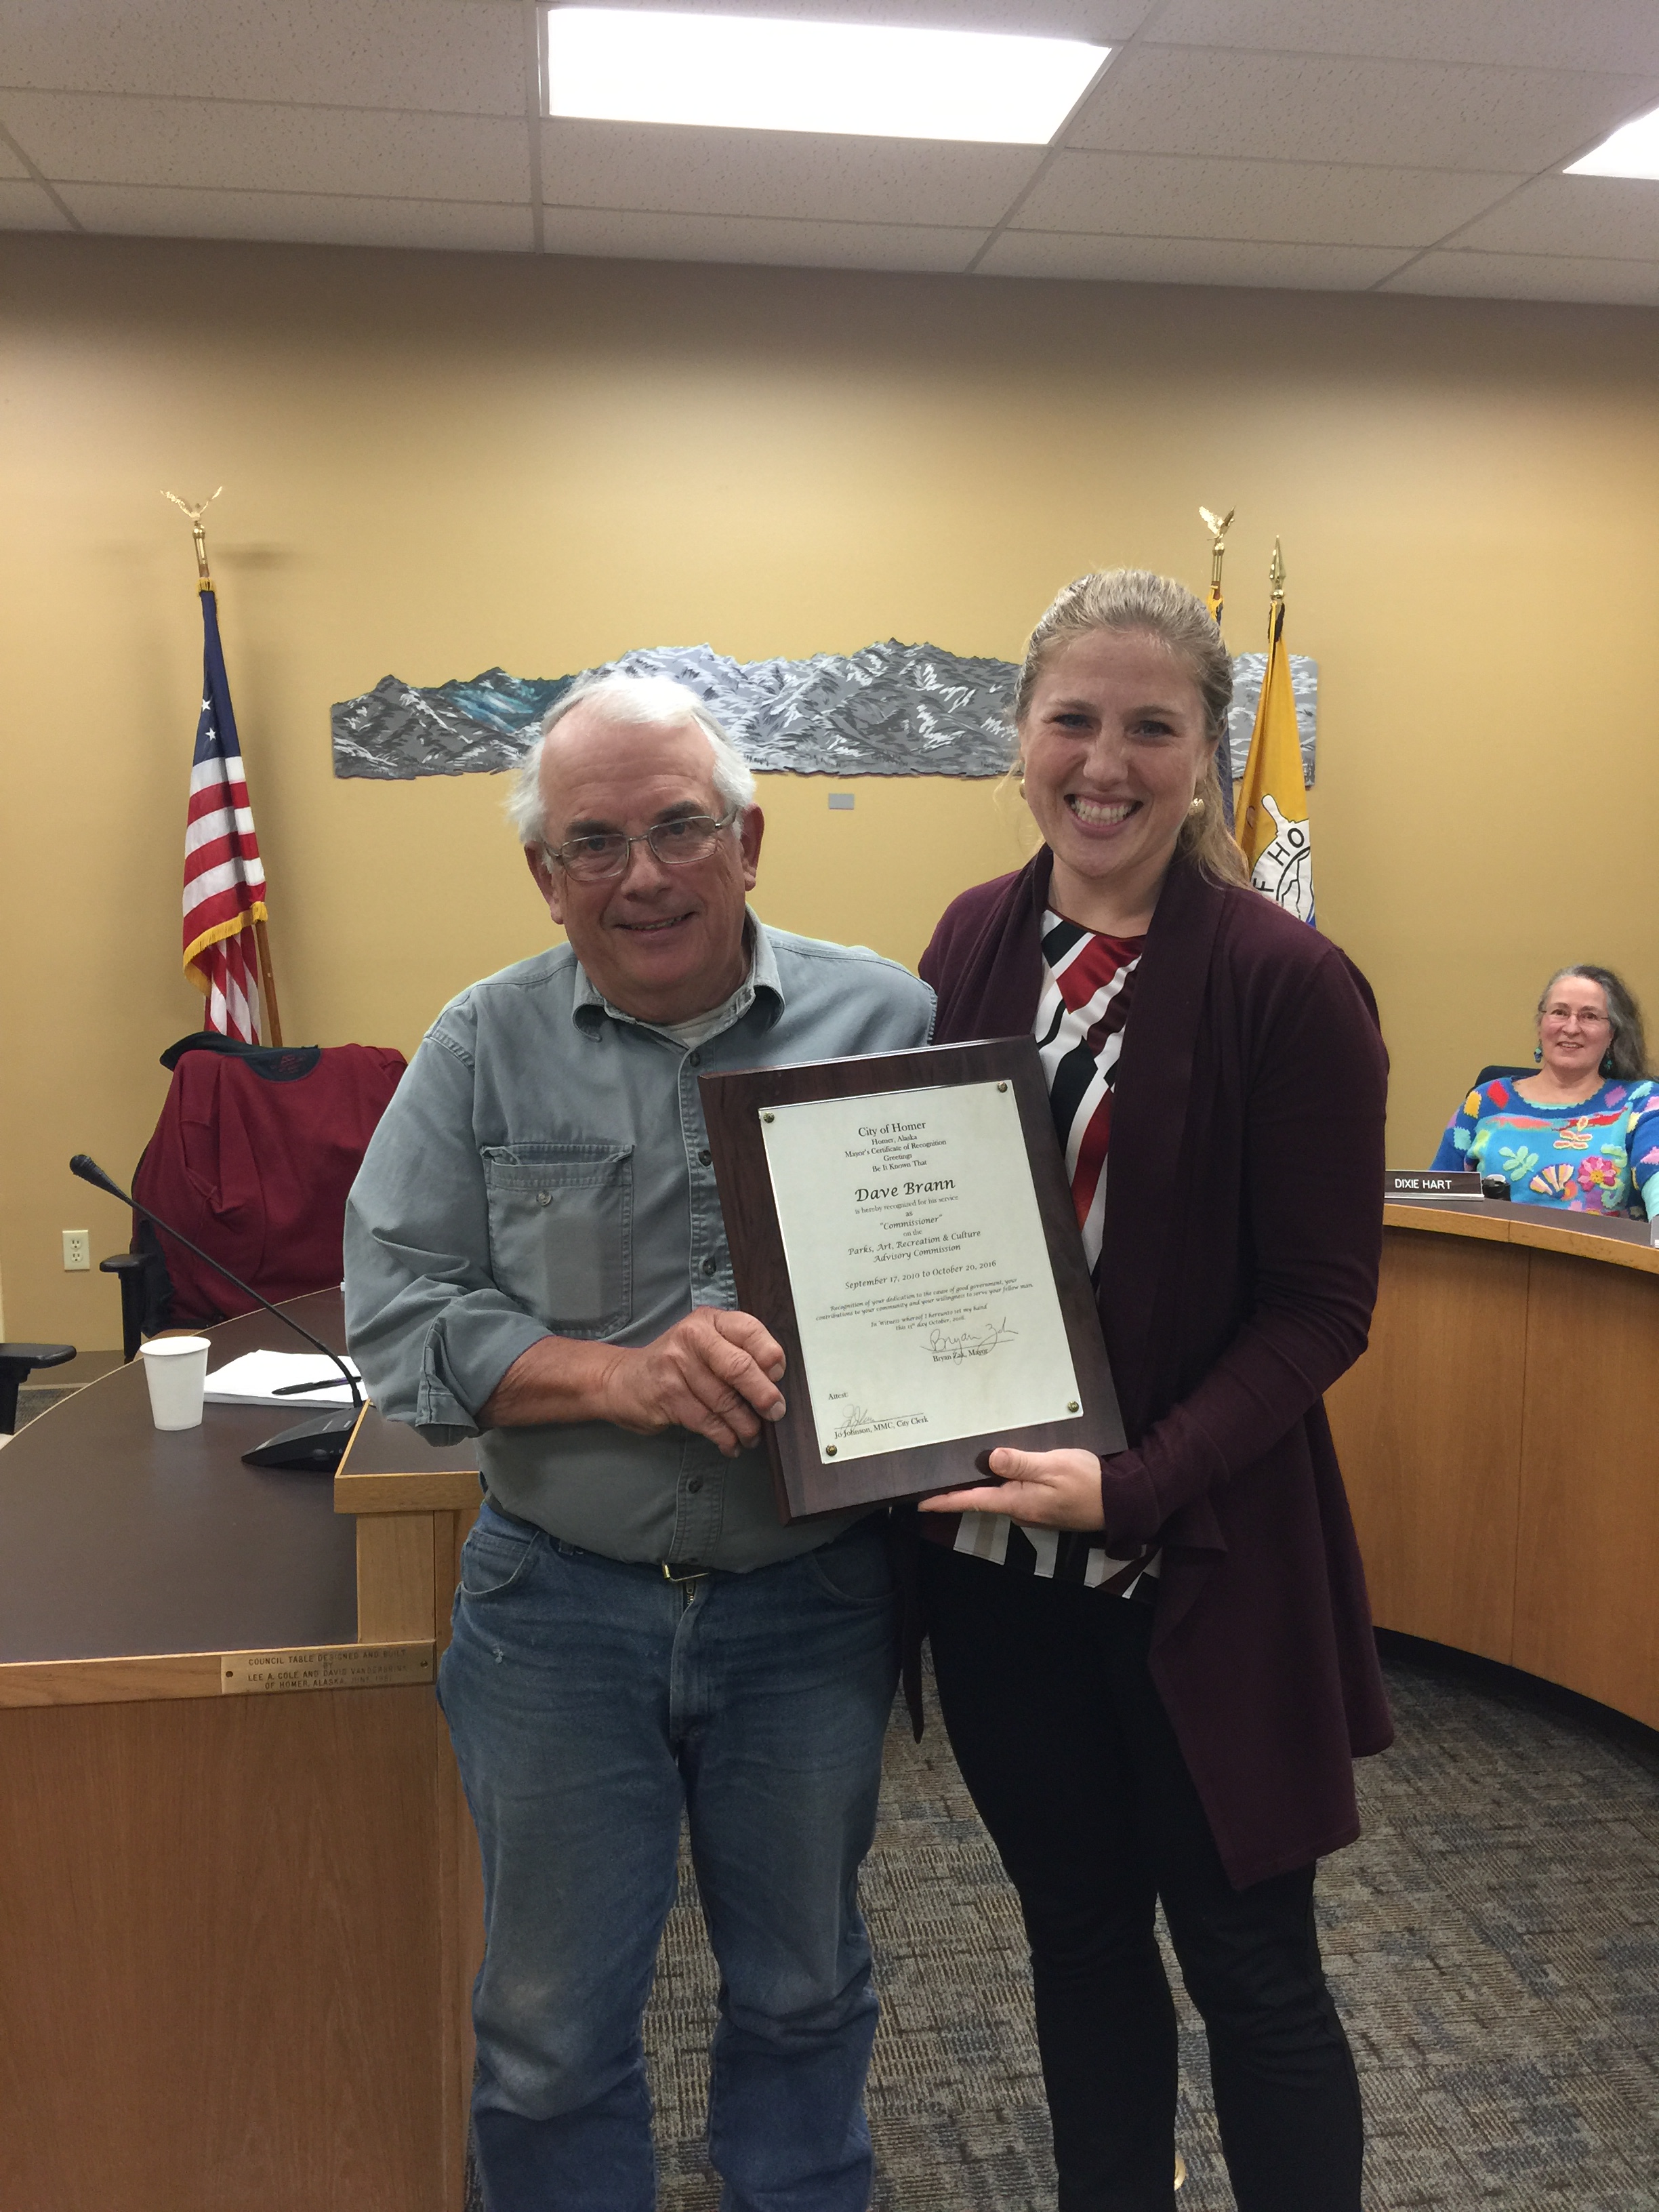 Community volunteer Dave Brann and City Manager Katie Koester pose for a photo after Koester presents Brann with a plaque thanking him for many years of service on the city's Parks, Arts, Recreation, and Culture Advisory Commission-Photo provided